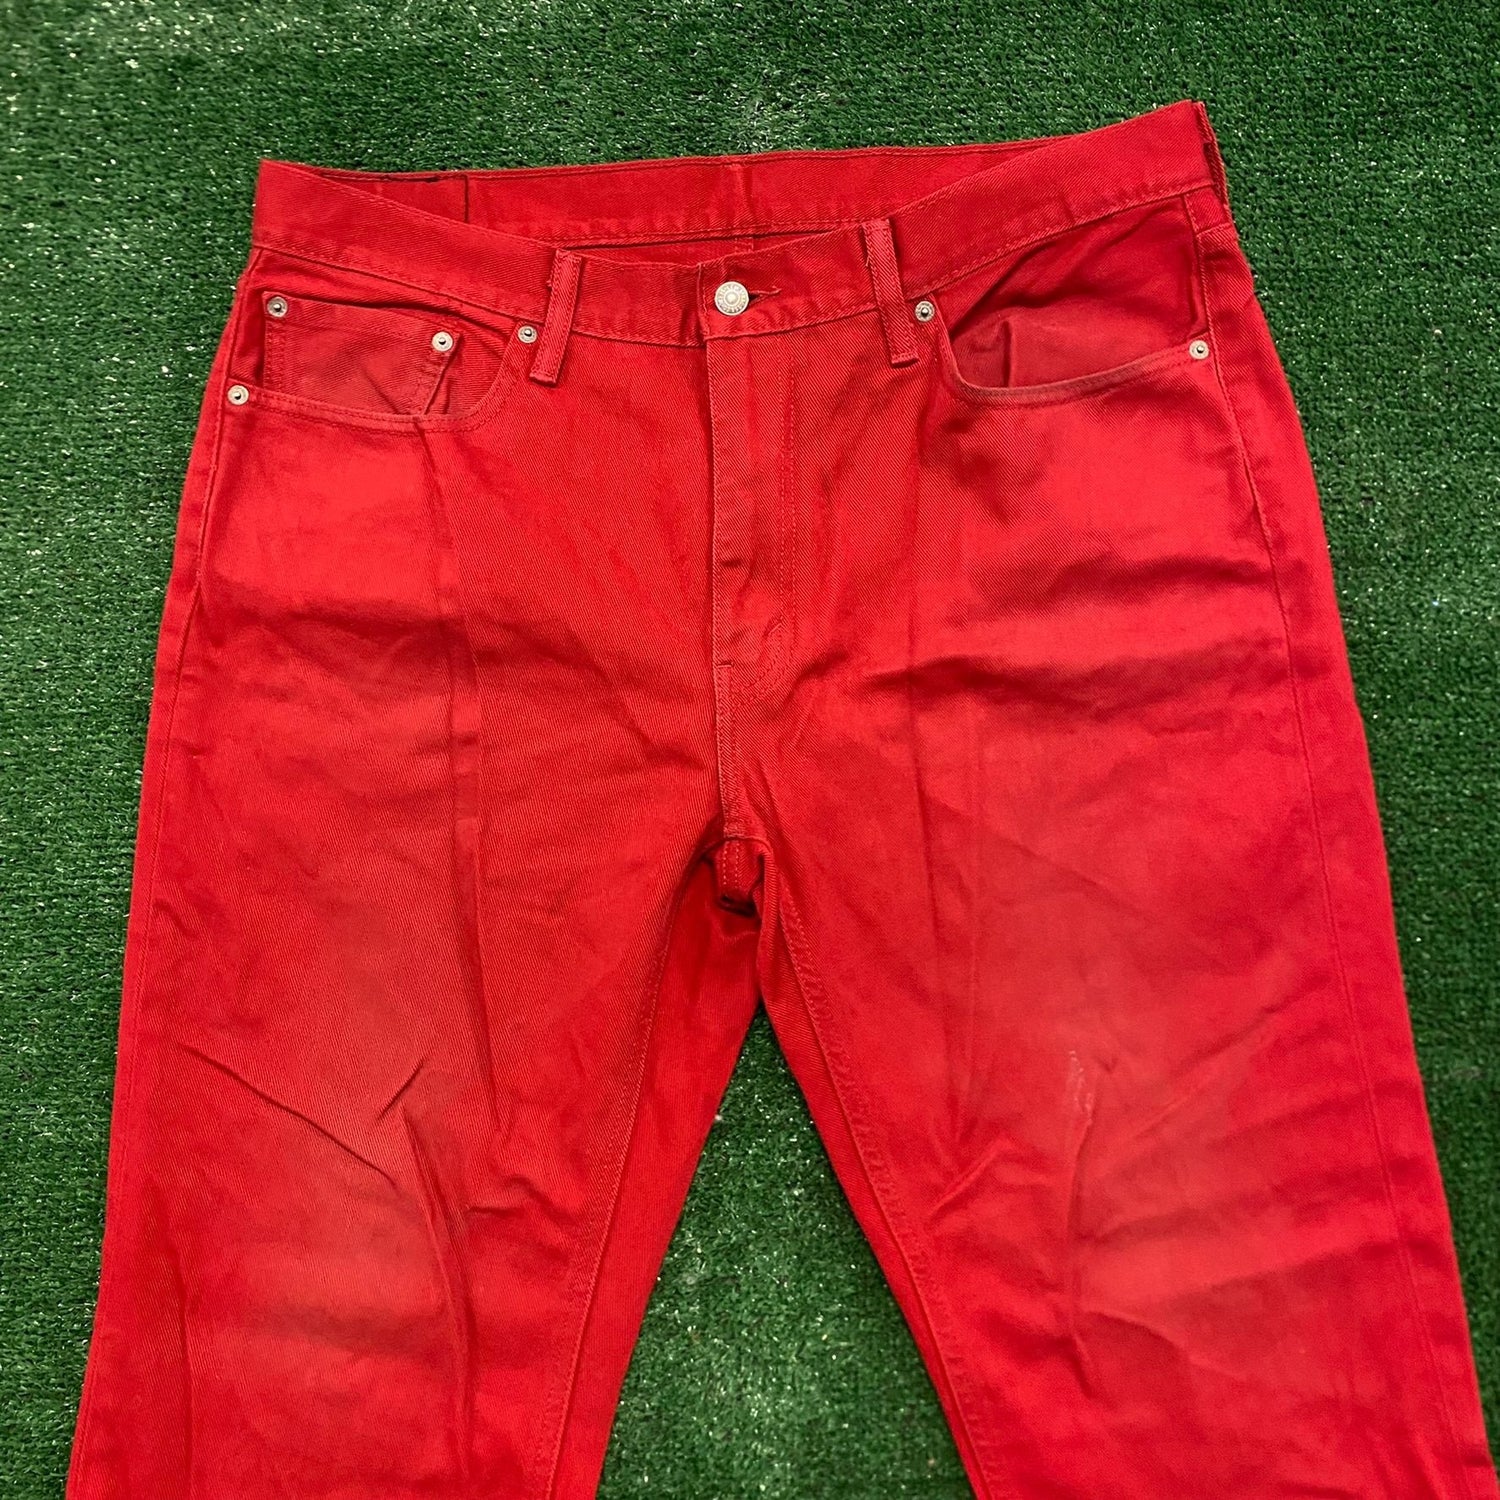 Red Denim Jeans Jeans, 59% OFF